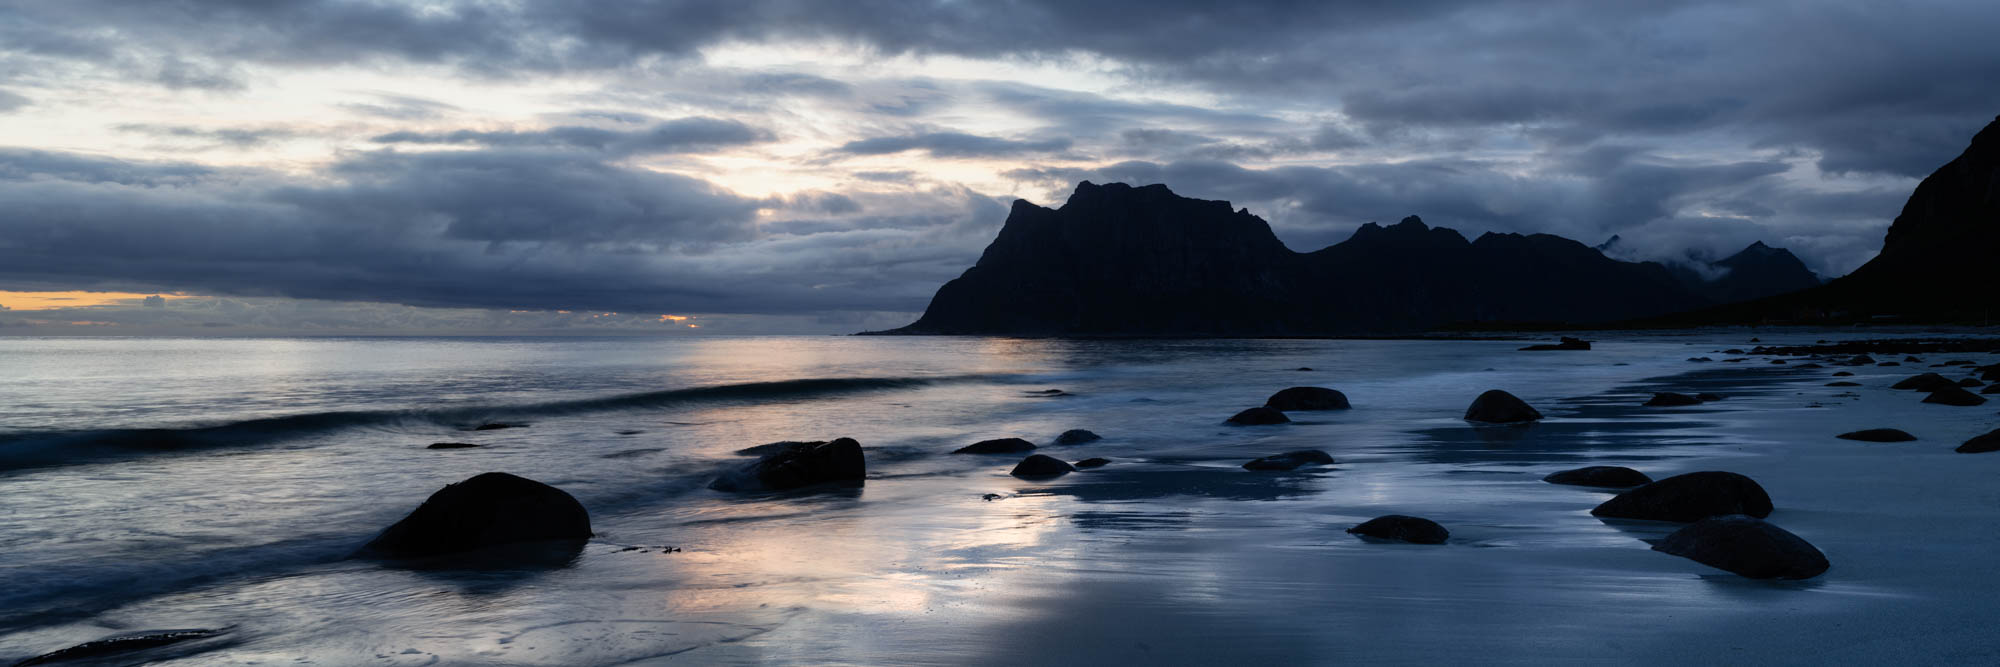 Panorama of a cinematic dark and moody beach in the Lofoten Islands at night